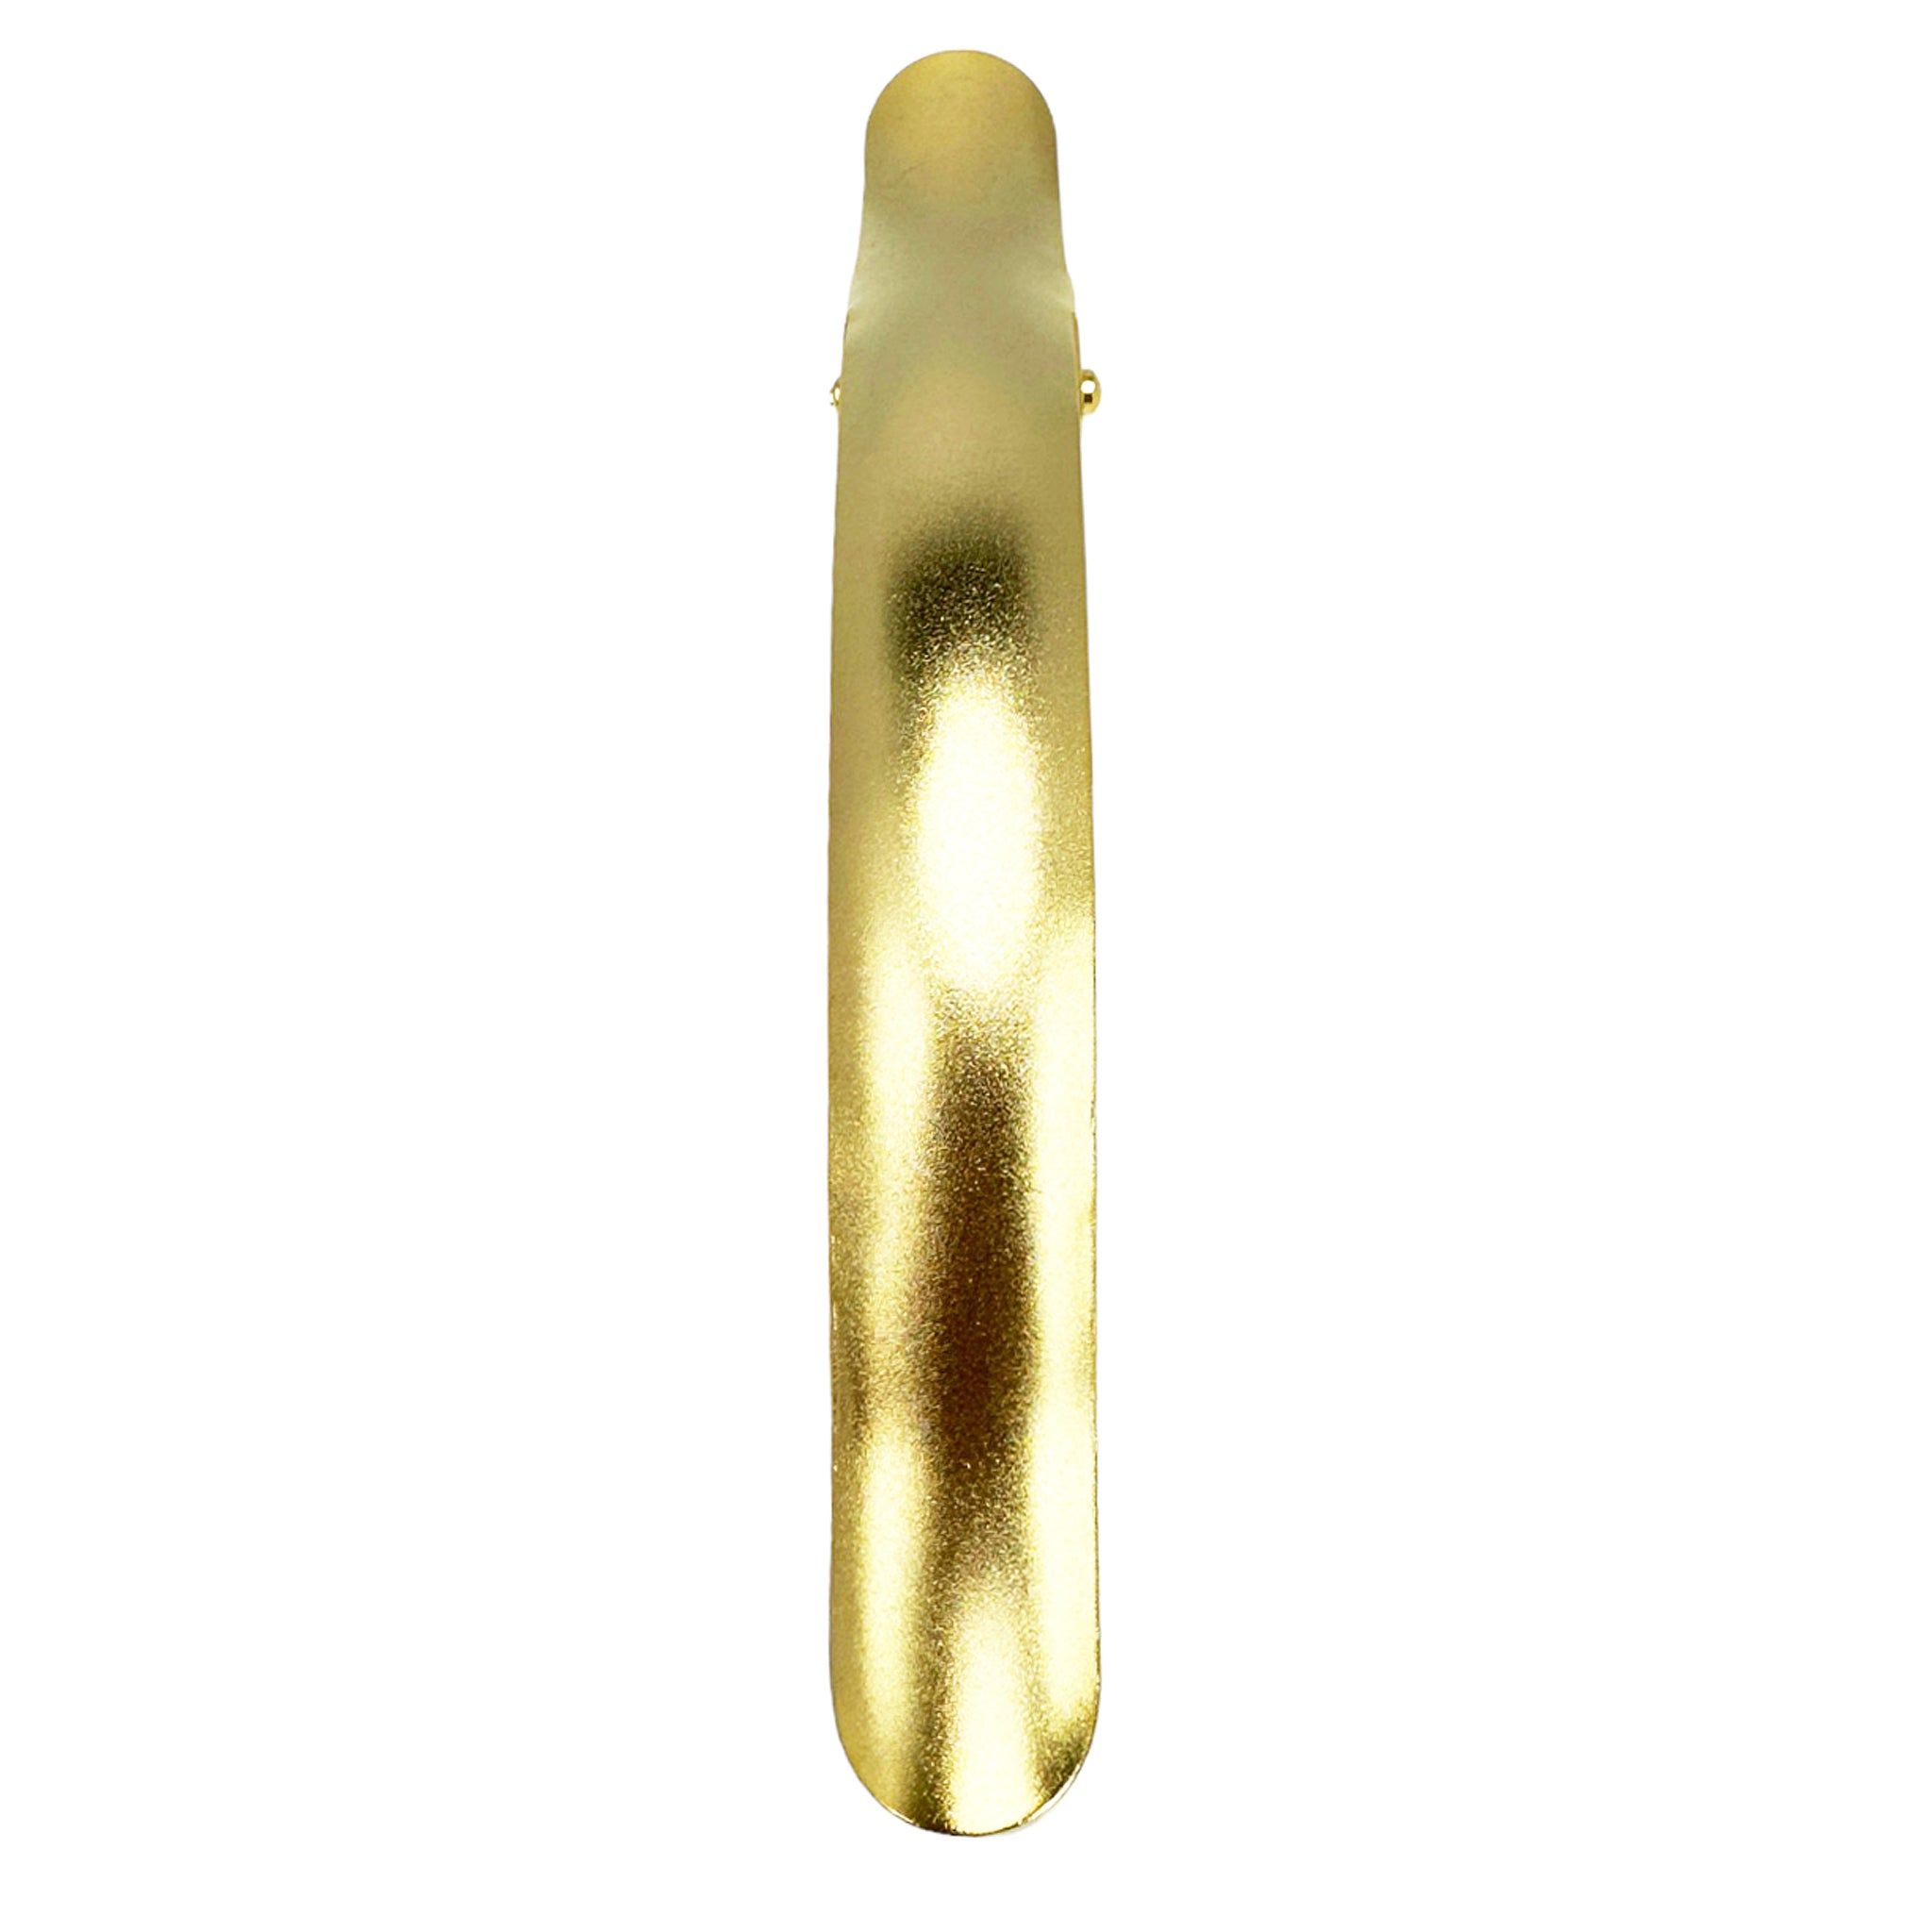 Ficcare Ficcarissimo Hair Clip in Matte Gold